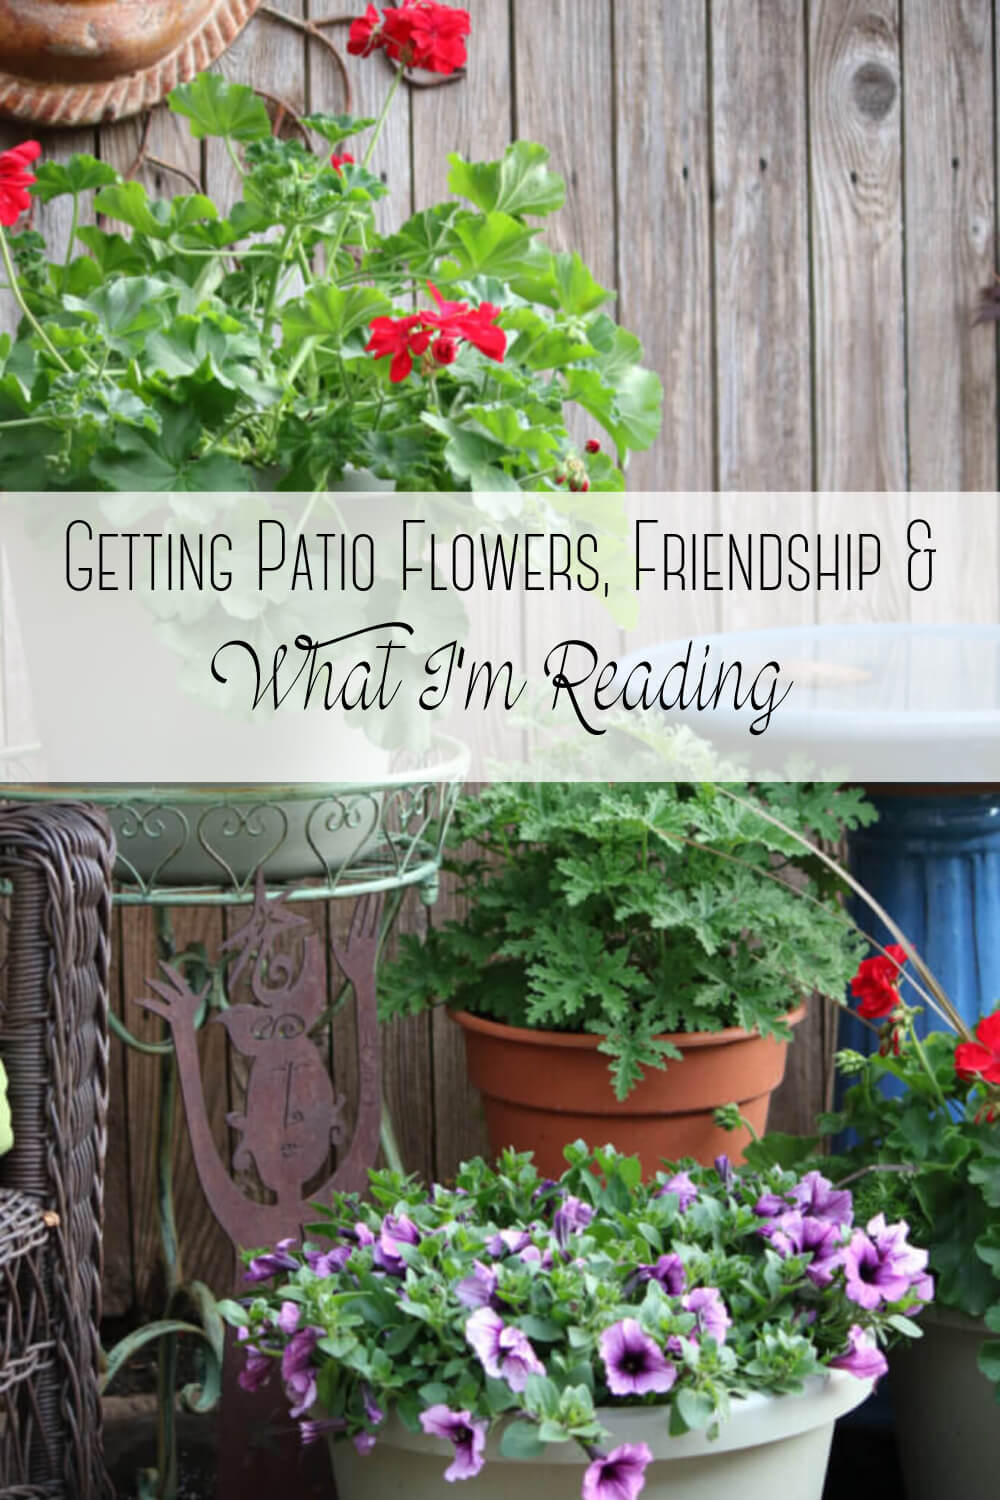 Getting Patio Flowers, Friendship & What I’m Reading